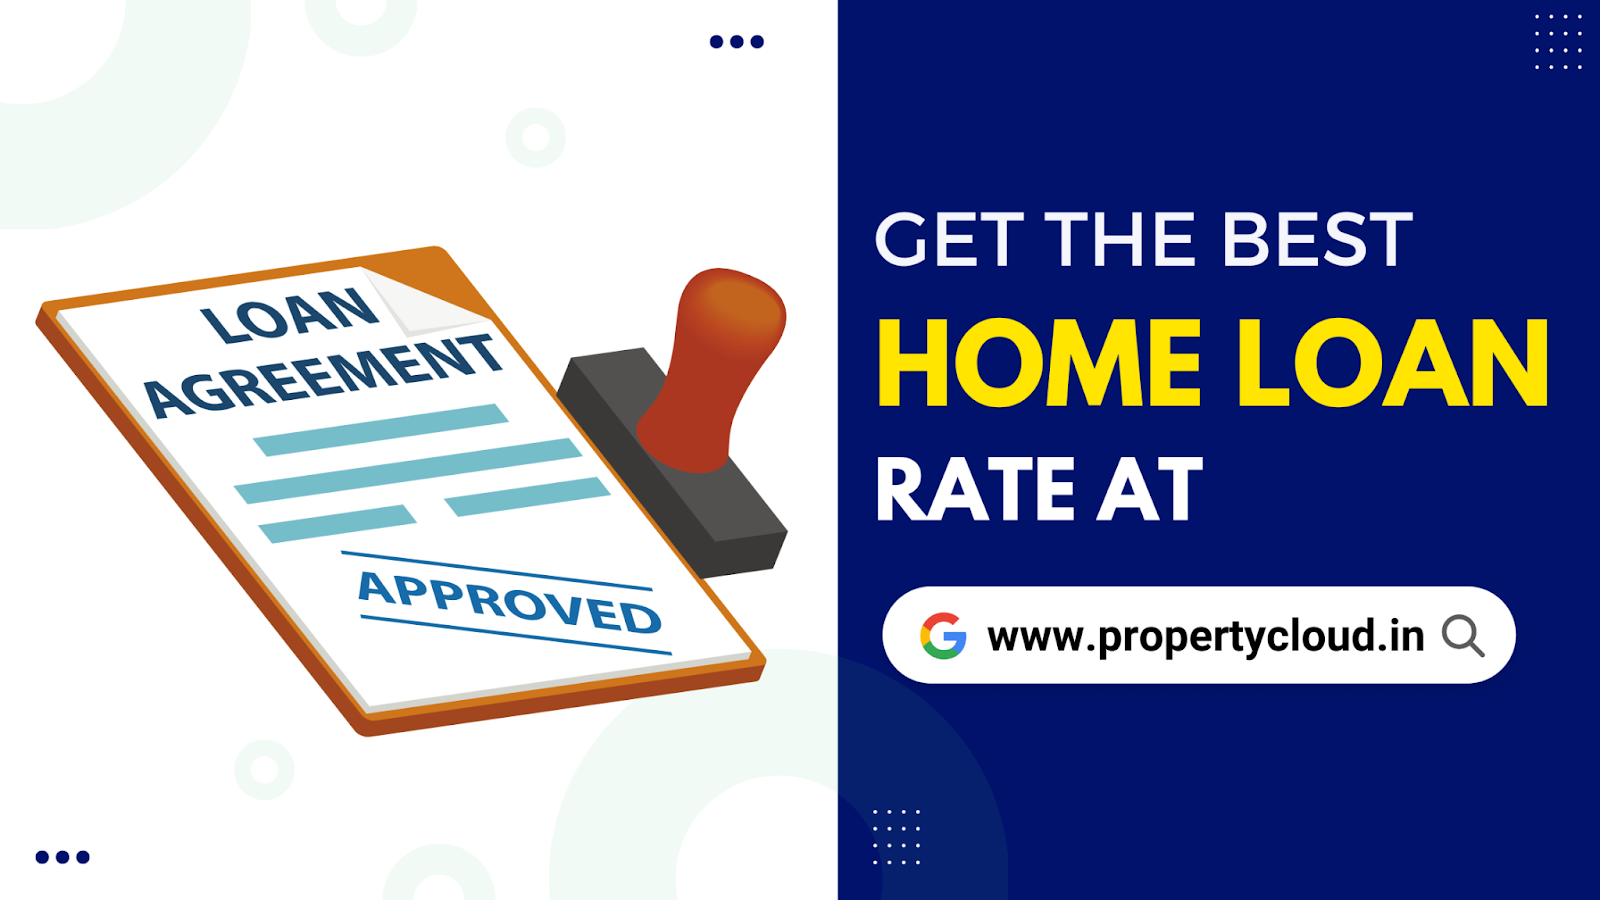 Get the Home Loan rate at ProprtyCloud